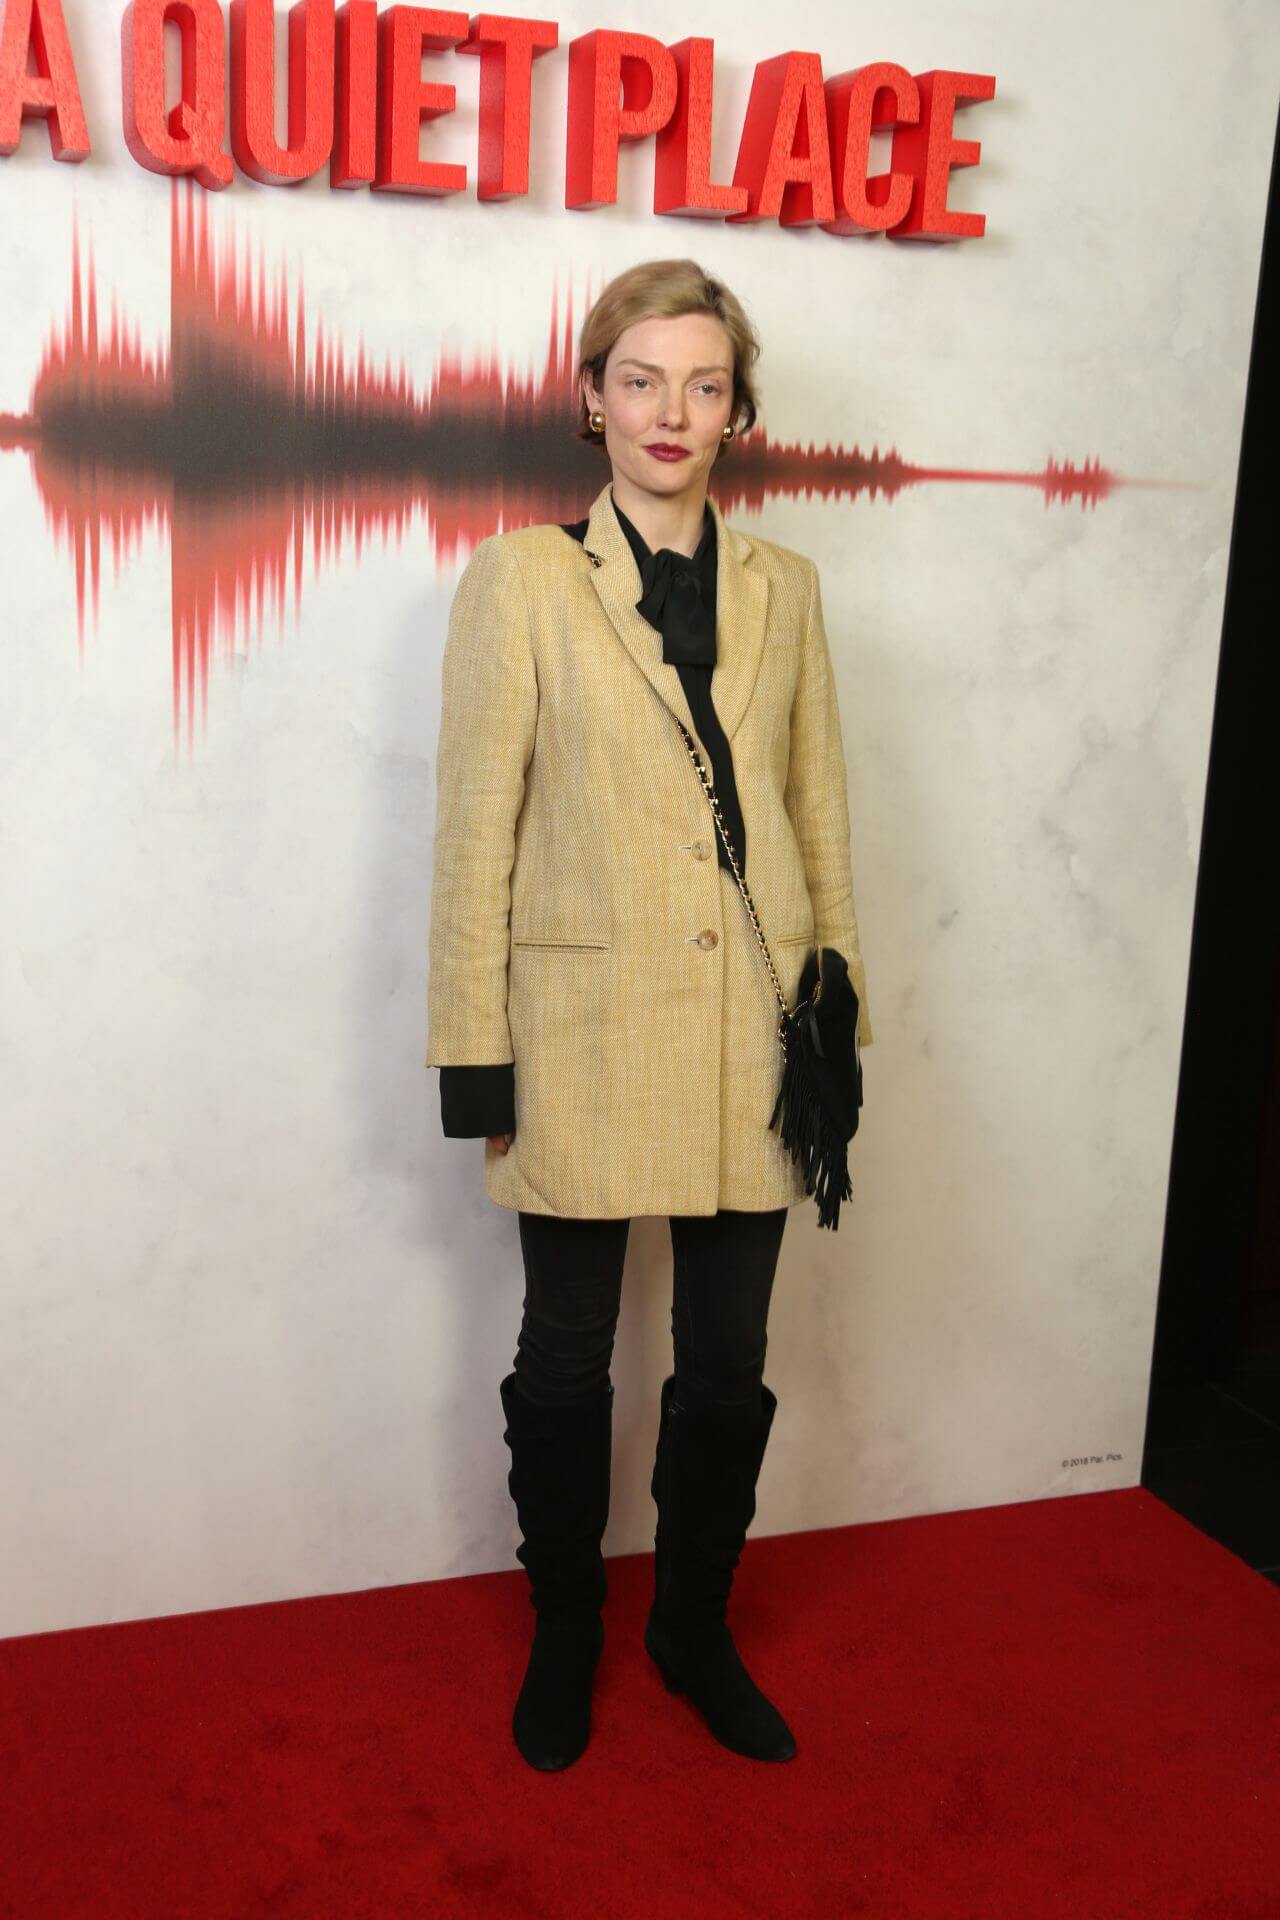 Camilla Rutherford  In Yellow Long Blazer Under Black Outfits At “A Quiet Place” Screening in London